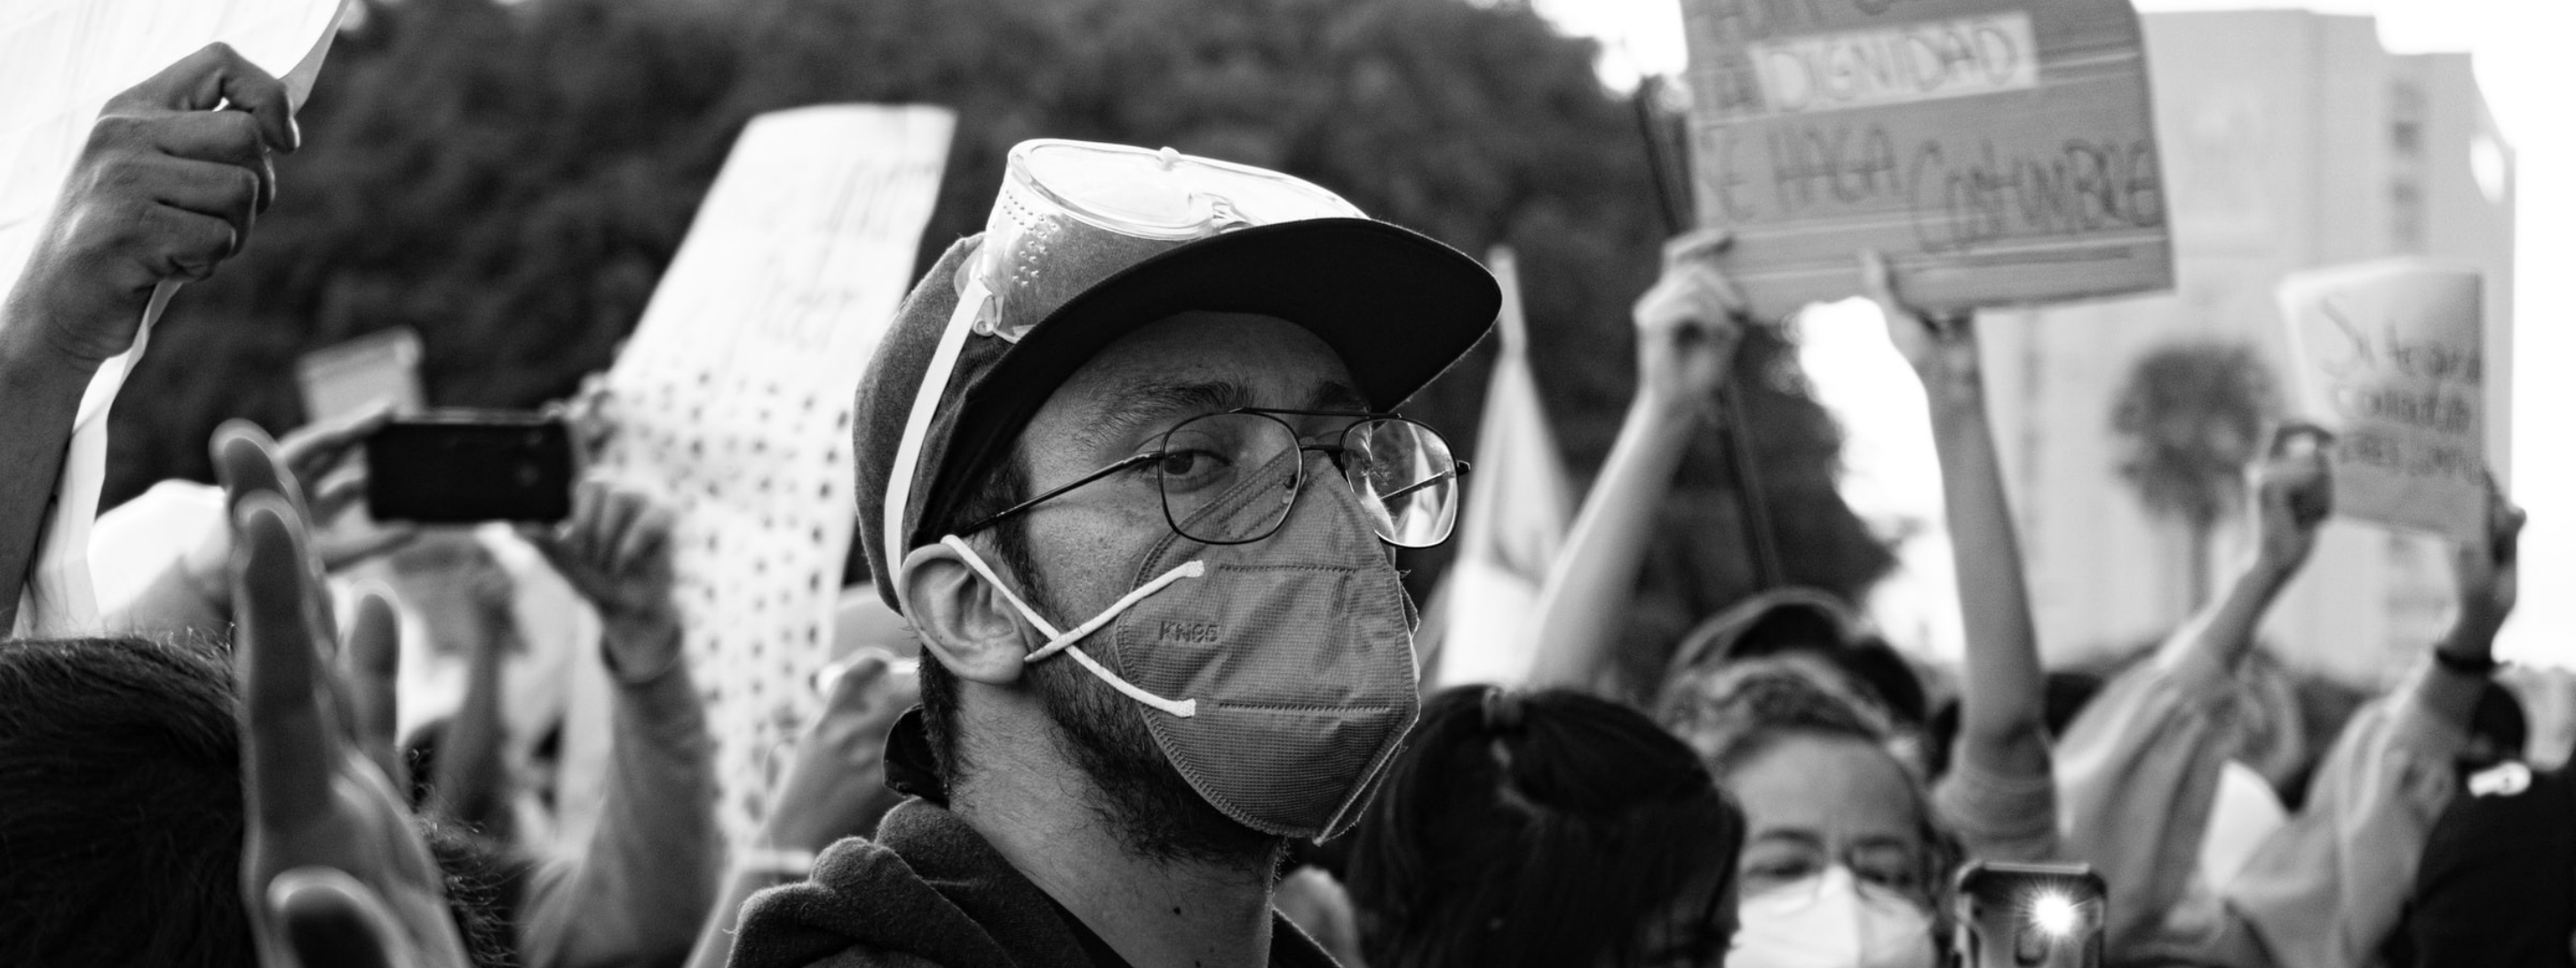 A man wearing a baseball cap and face mask stairs at the camera amid a protest